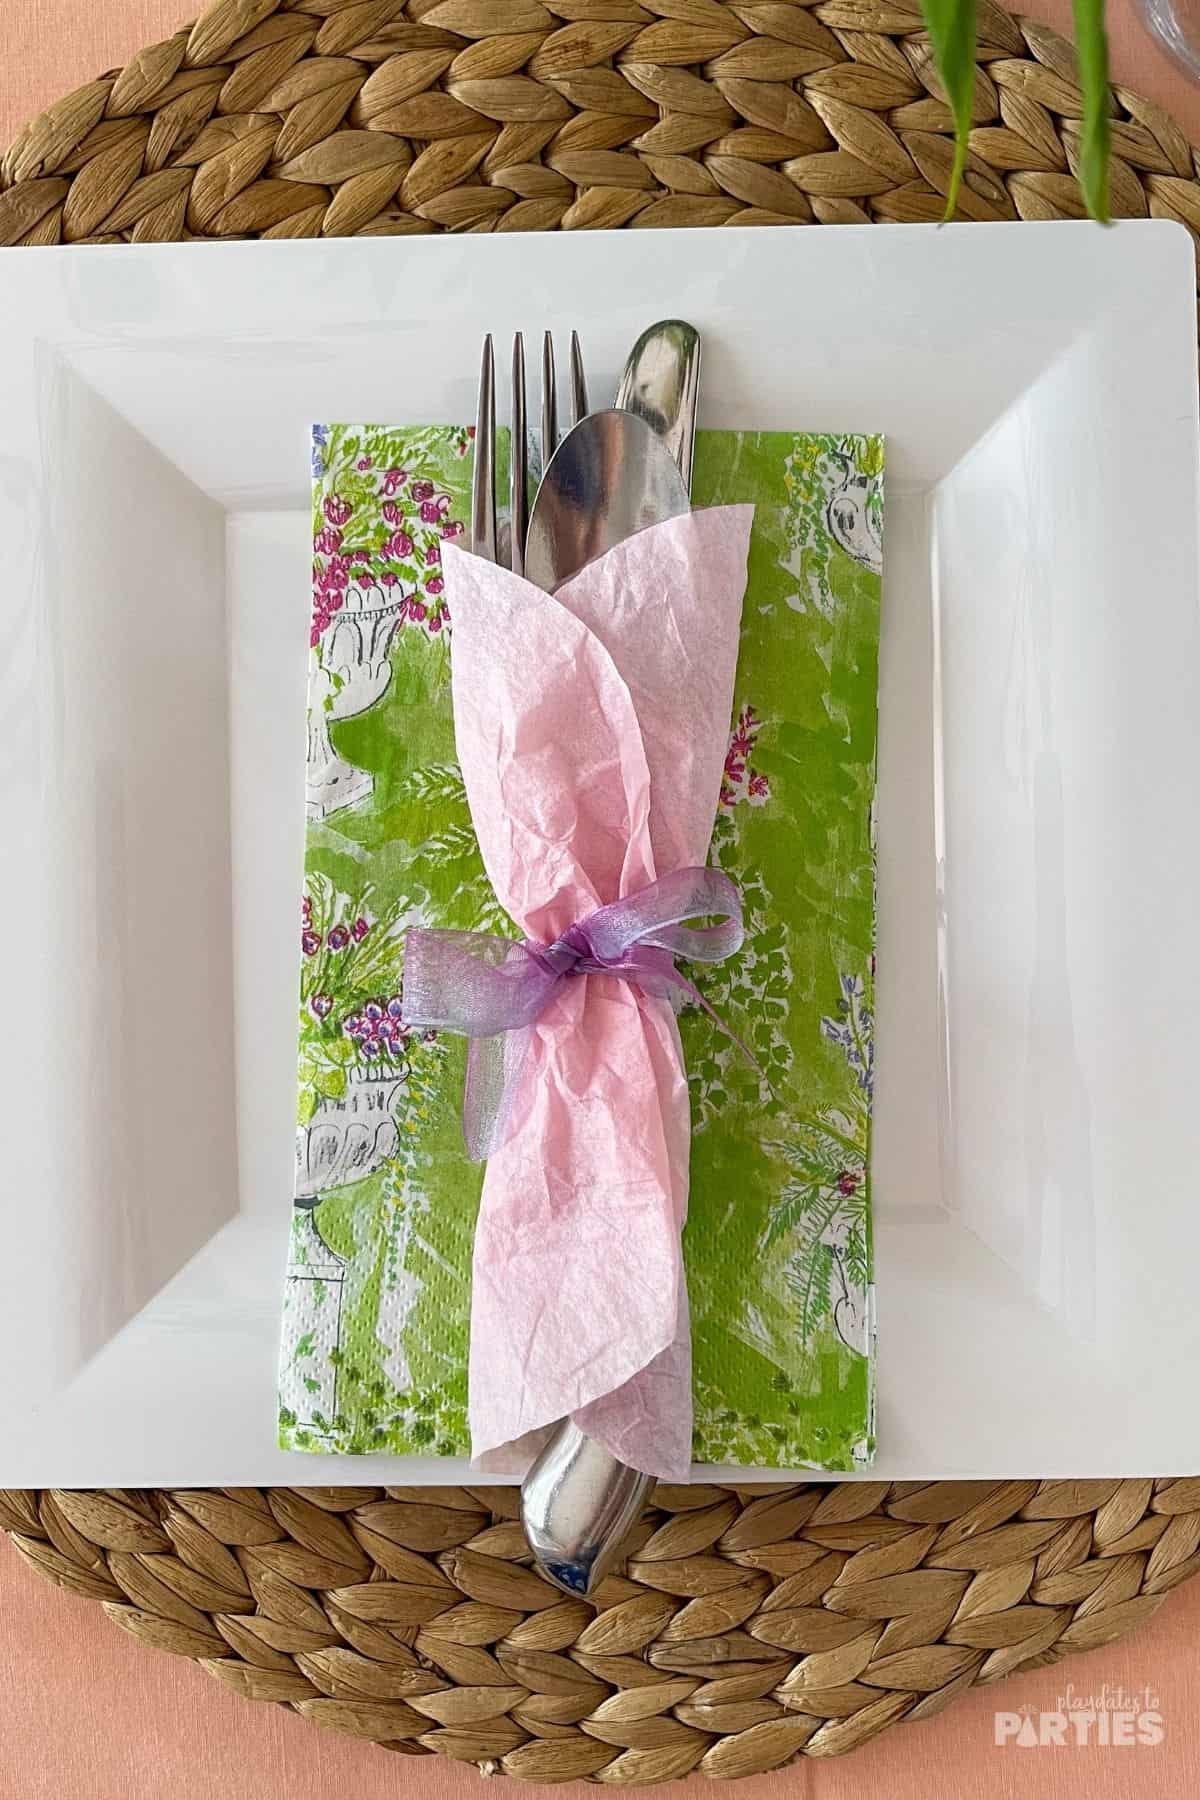 Utensils in a pink wrapper layered on top of a green napkin and a white plate.